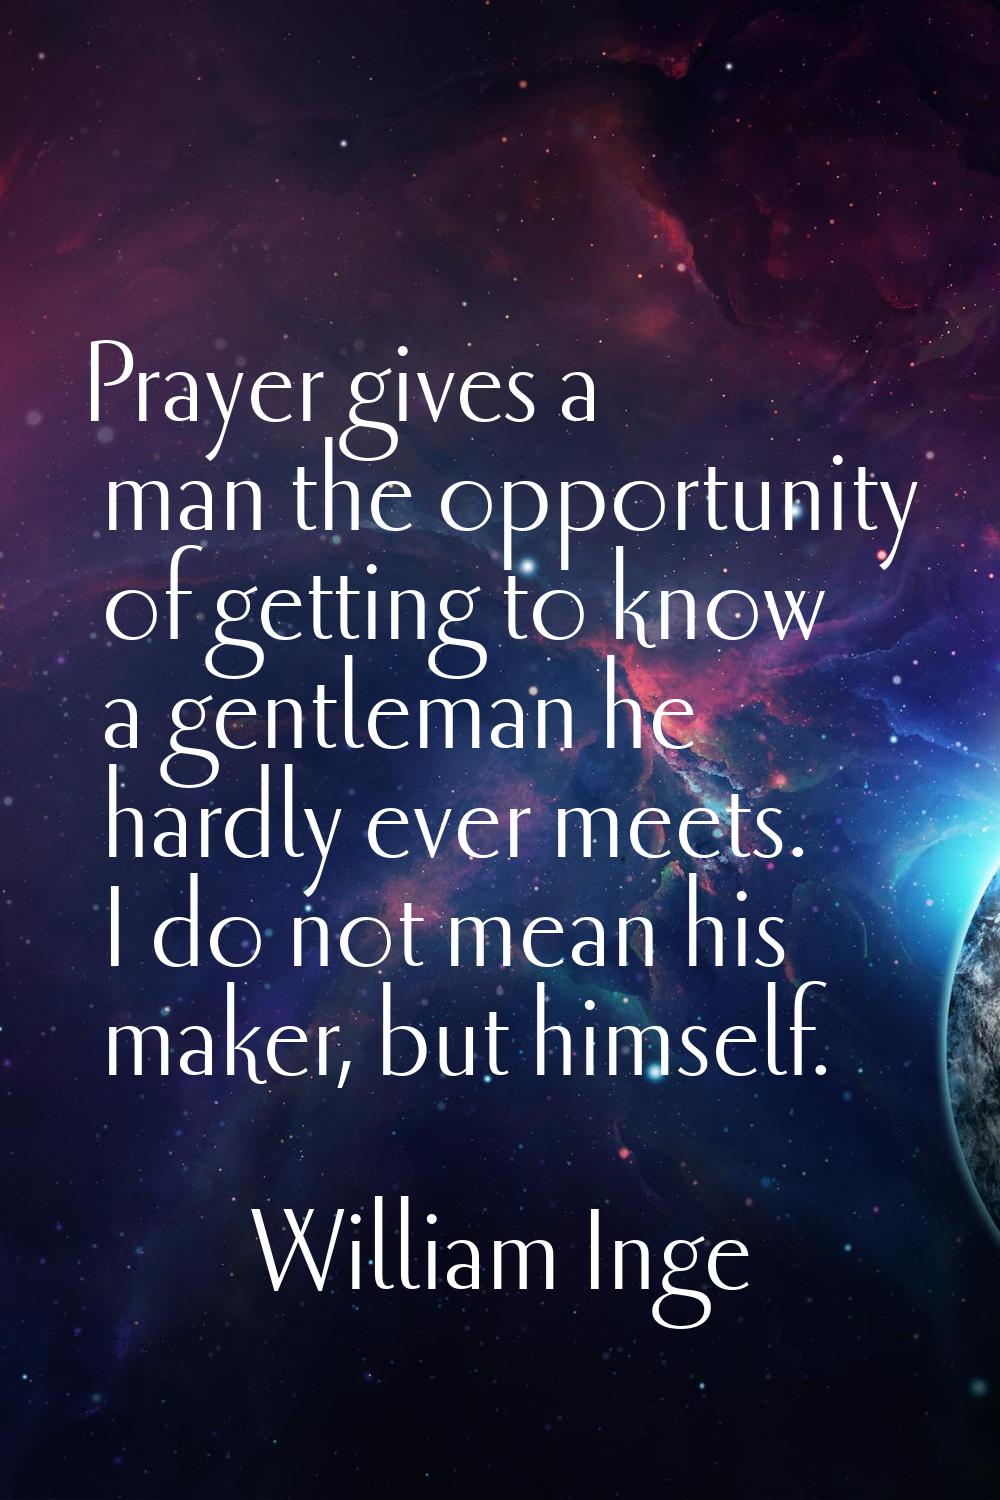 Prayer gives a man the opportunity of getting to know a gentleman he hardly ever meets. I do not me